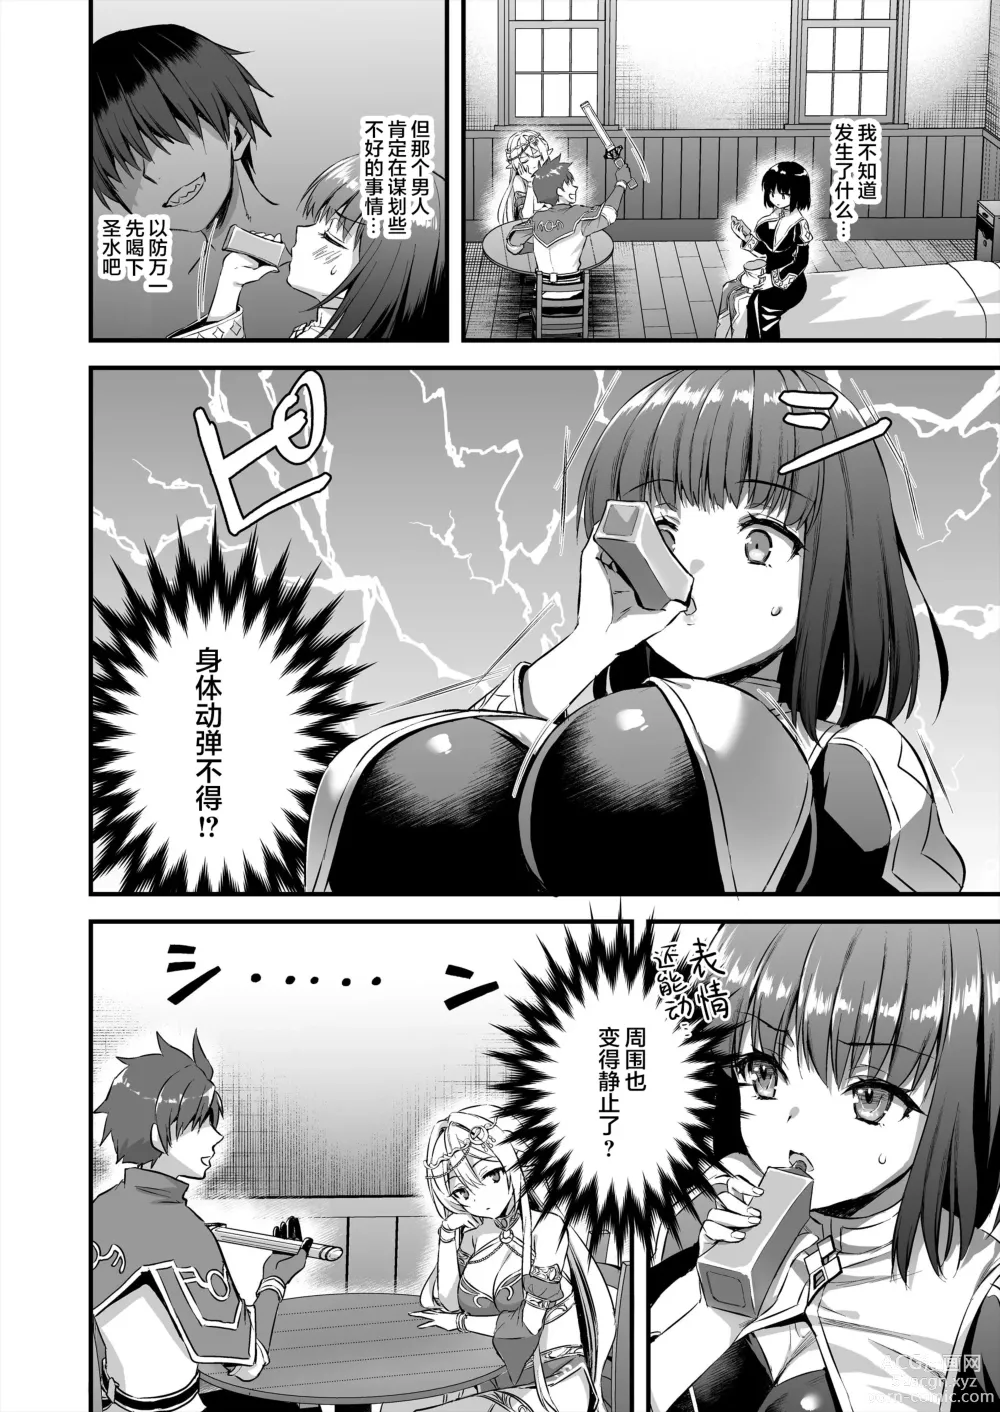 Page 17 of doujinshi Other World Elf Estruss Magic Eye 5 ~Time Stop Edition~